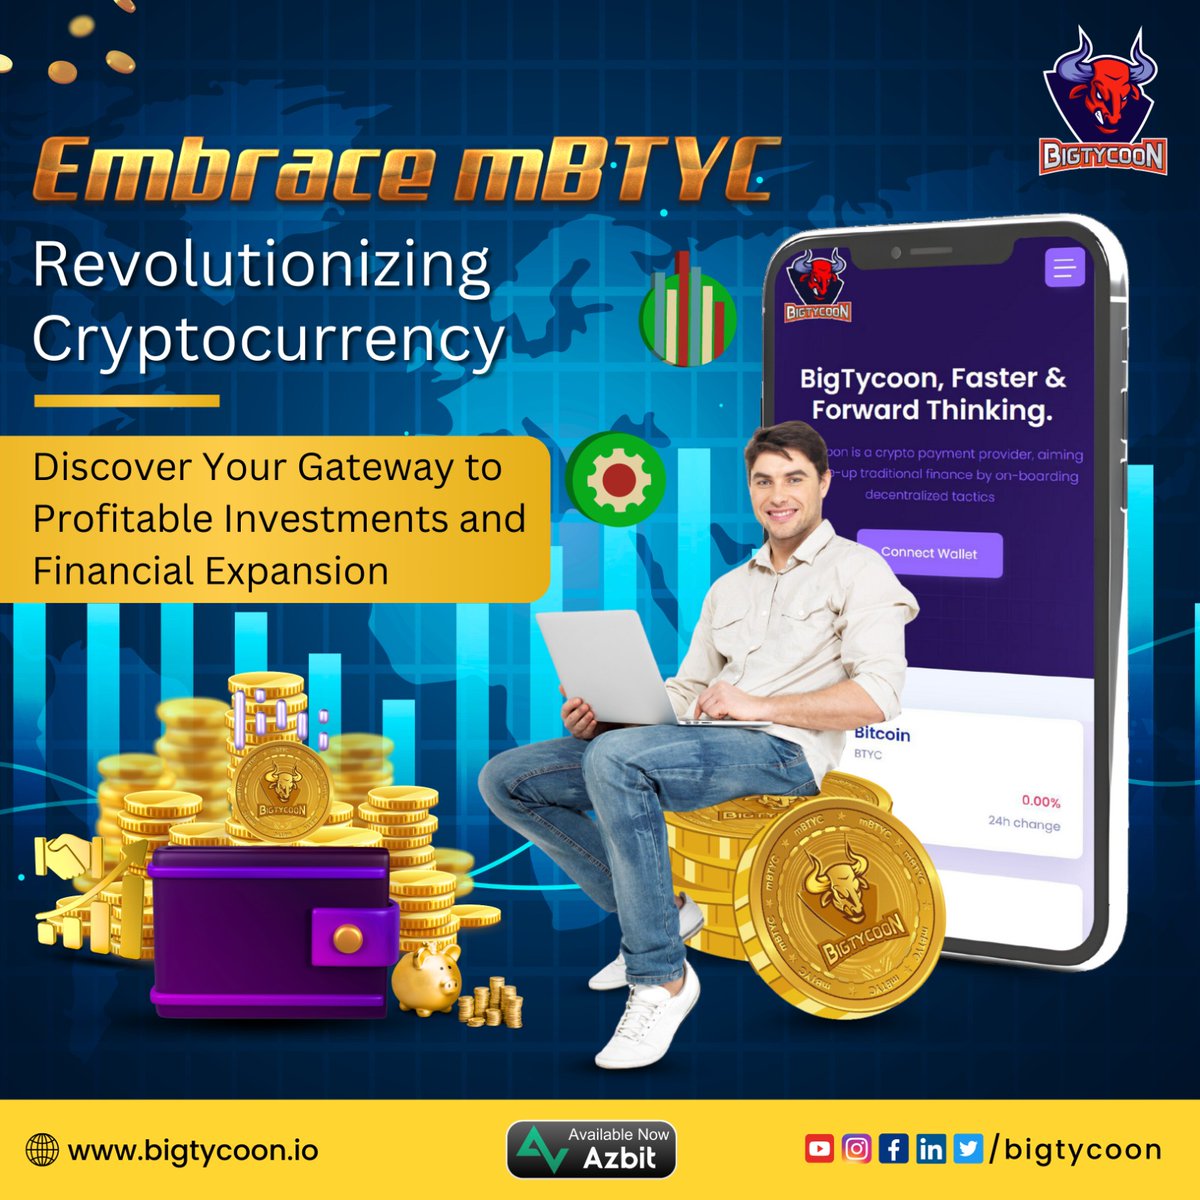 Investing in the mBTYC cryptocurrency can be a smart move for those looking to diversify their portfolio and potentially earn high returns on their investment

#mBTYC is AVAILABLE at #Azbit